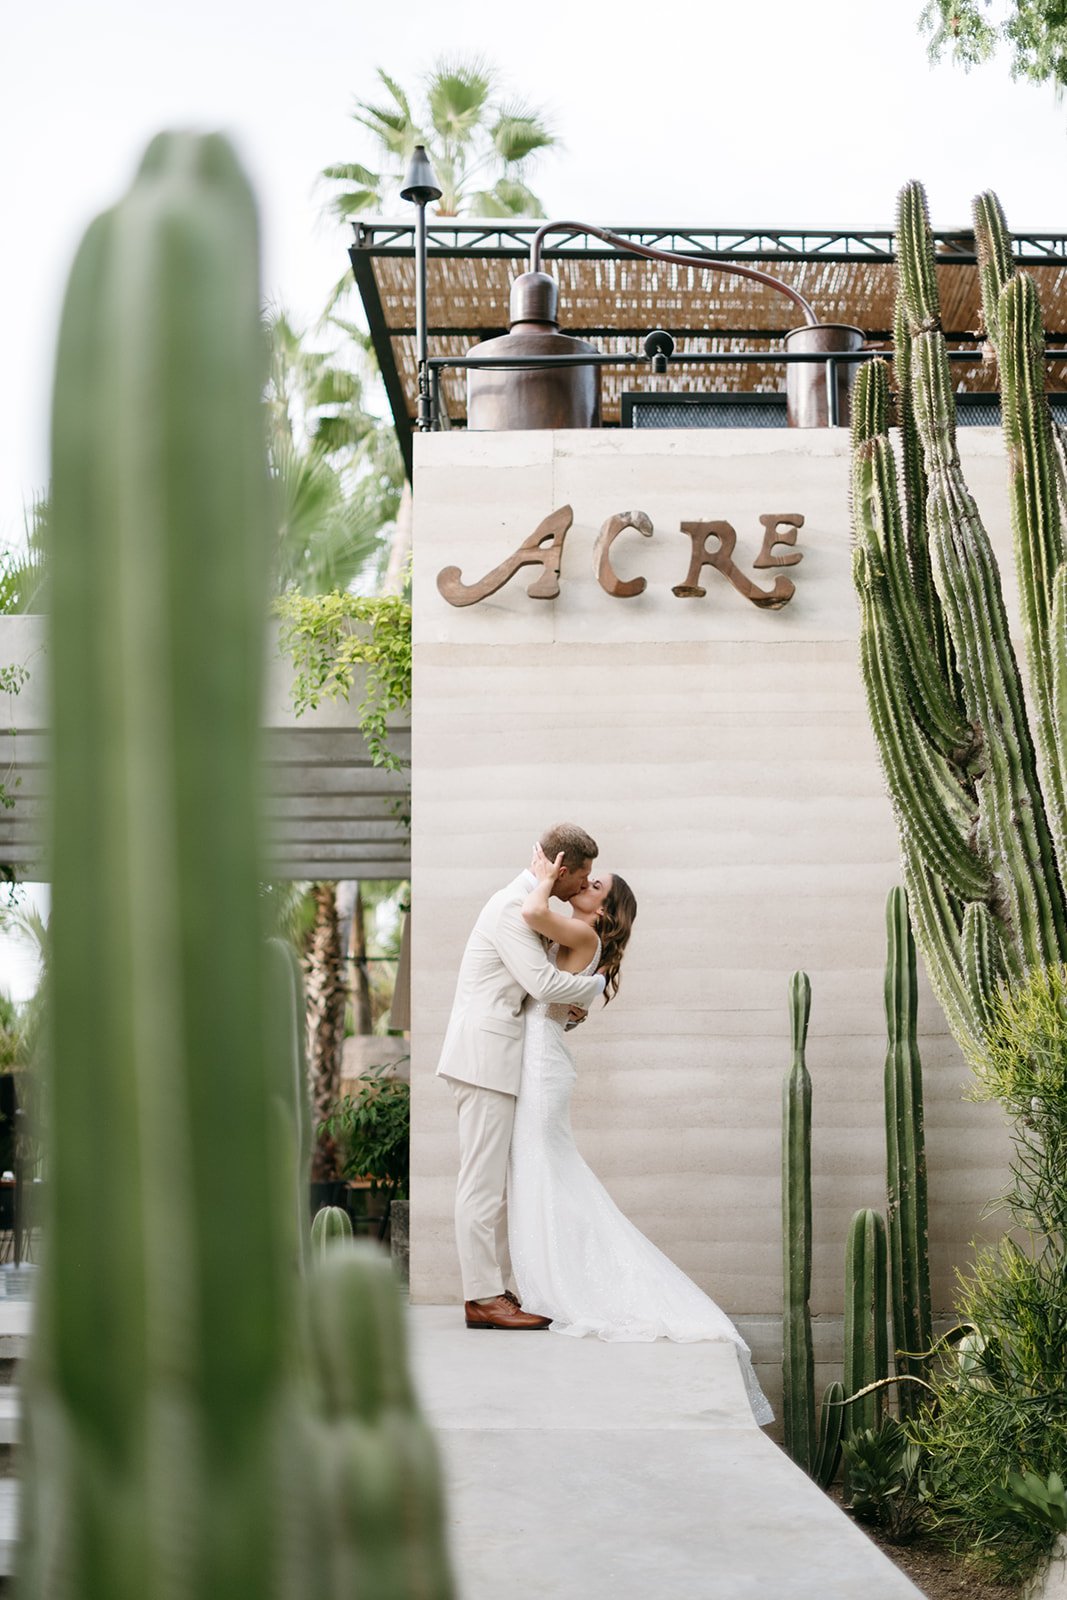 holly-andrew-acre-cabo-mexico-wedding-preview-22_websize.jpg